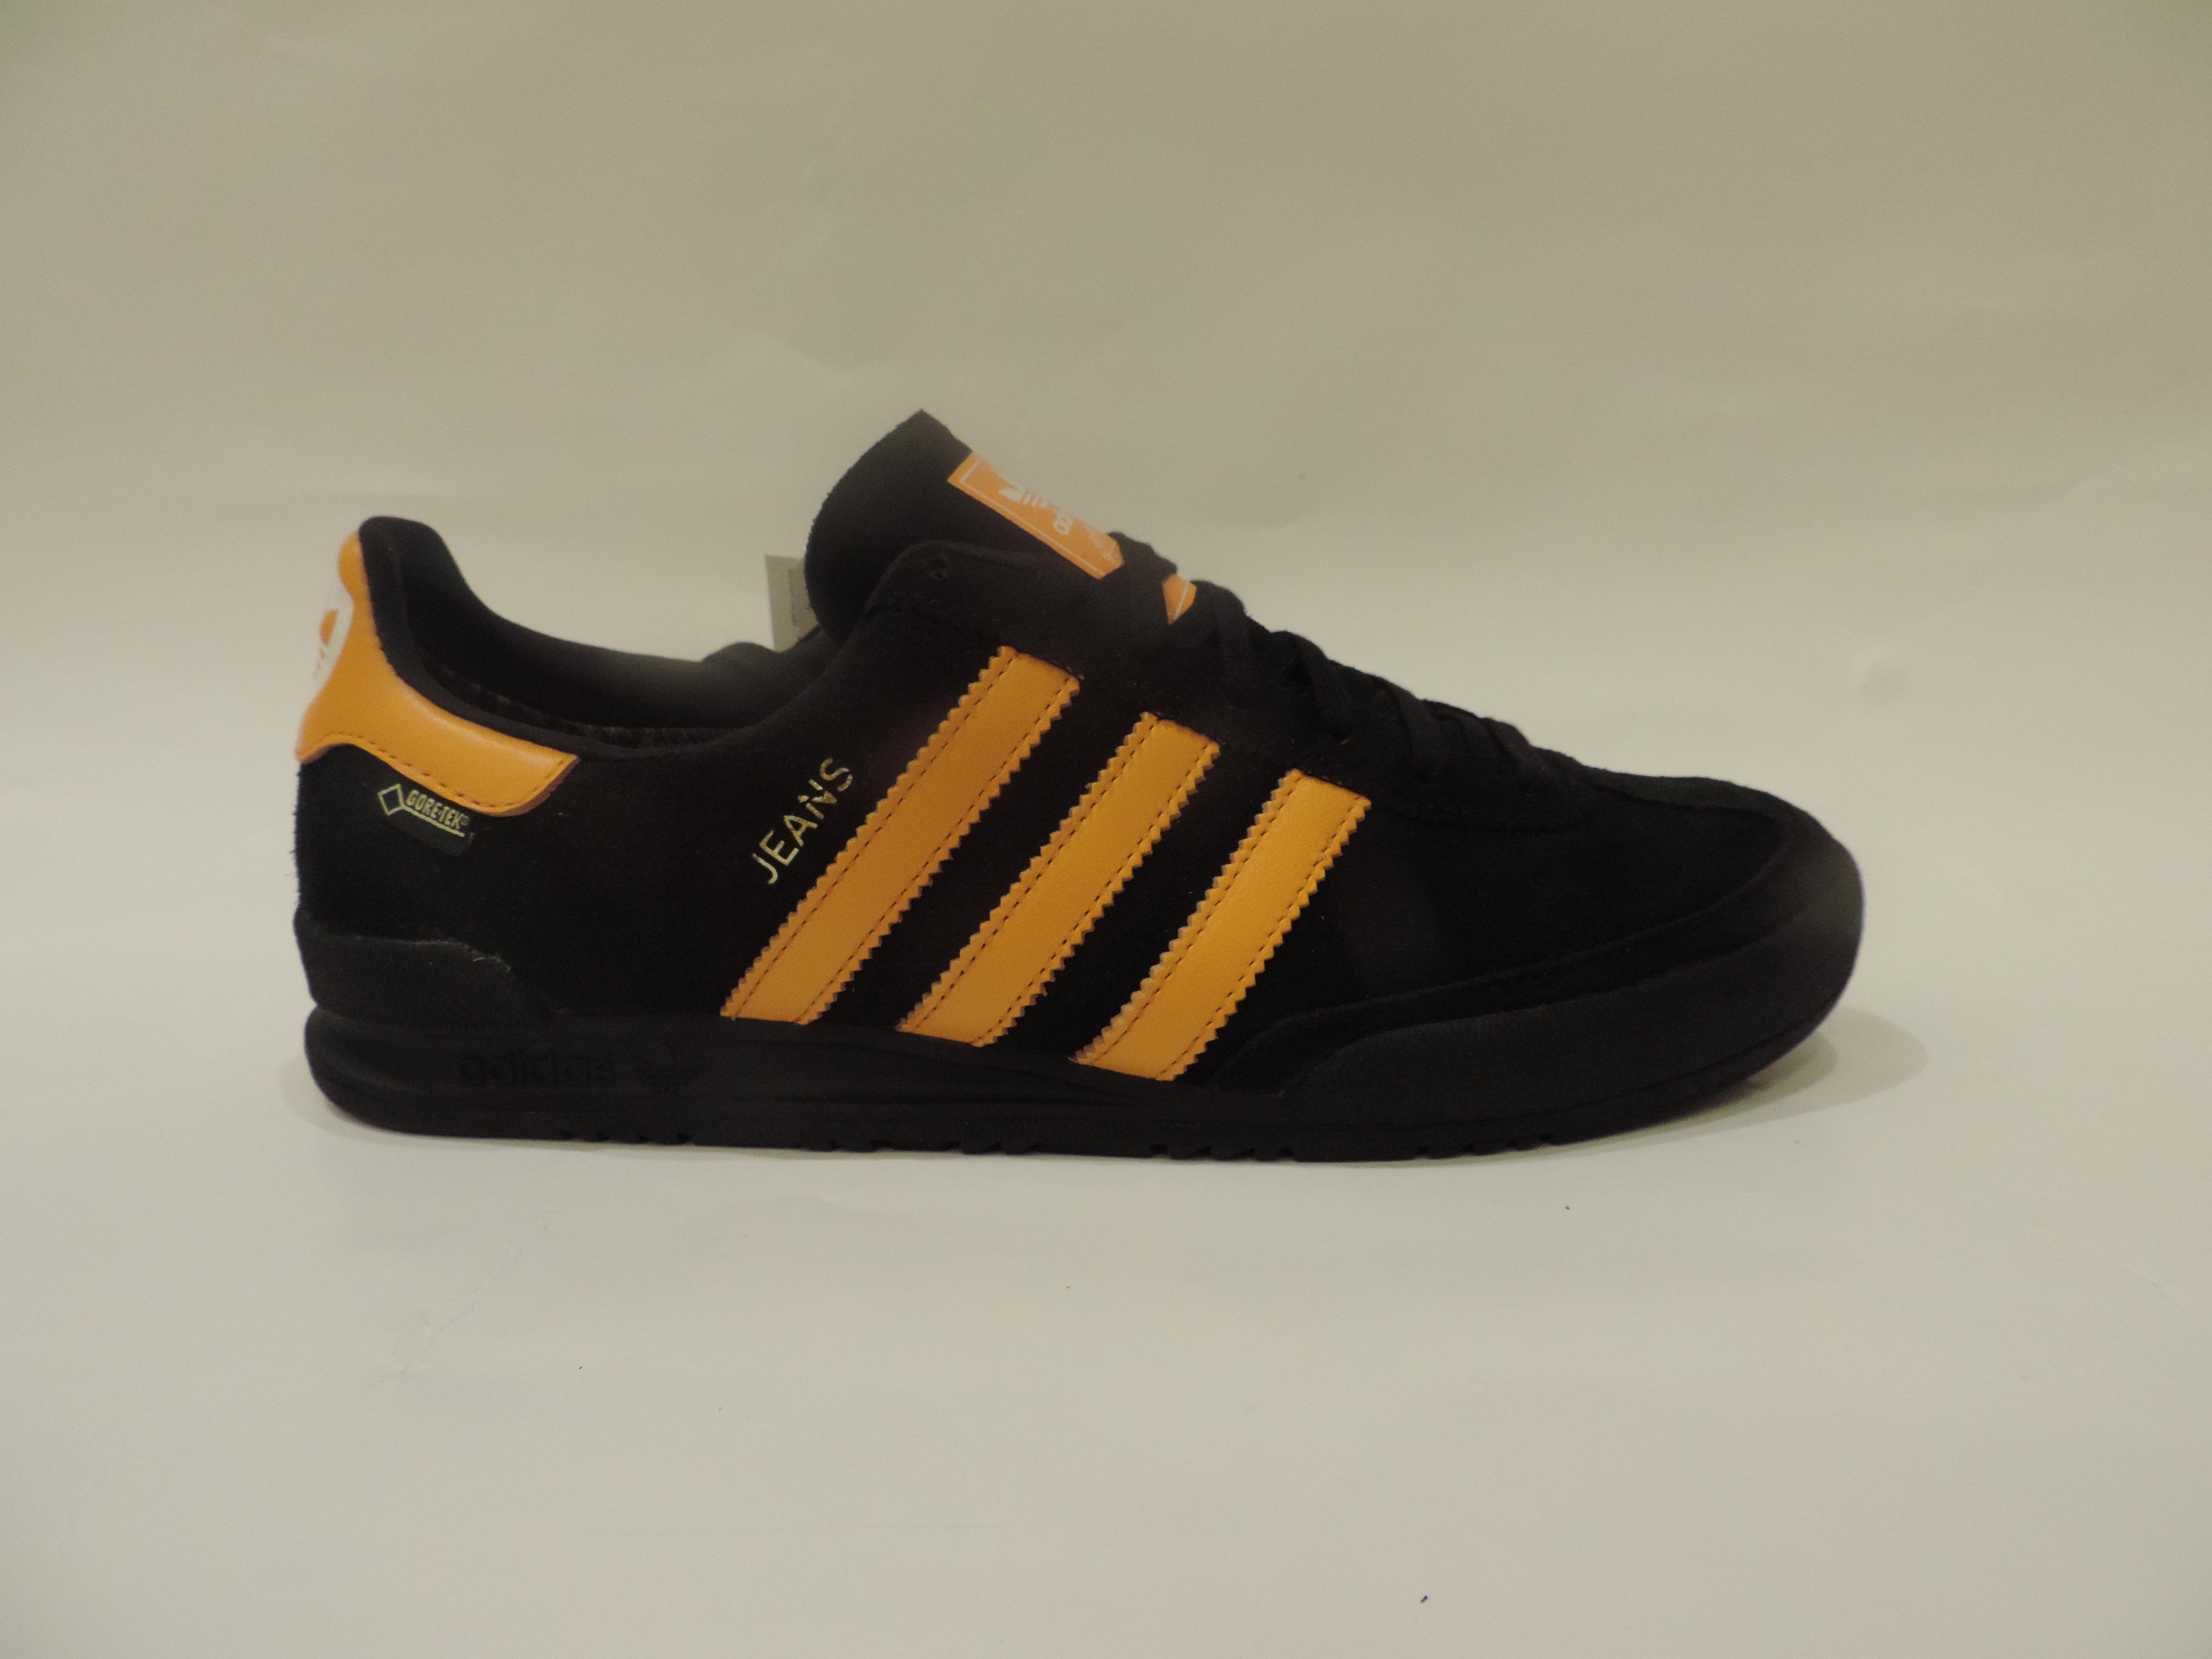 Sentimental marble Learner Dassleresales on Twitter: "AVAILABLE NOW: Adidas Jeans GTX Black/Orange  Sizes 8 9 10 11 and price of £84.99 Available here: https://t.co/pSOeJhdHI0  #adidas #jeans https://t.co/xavwZ1TuIN" / Twitter